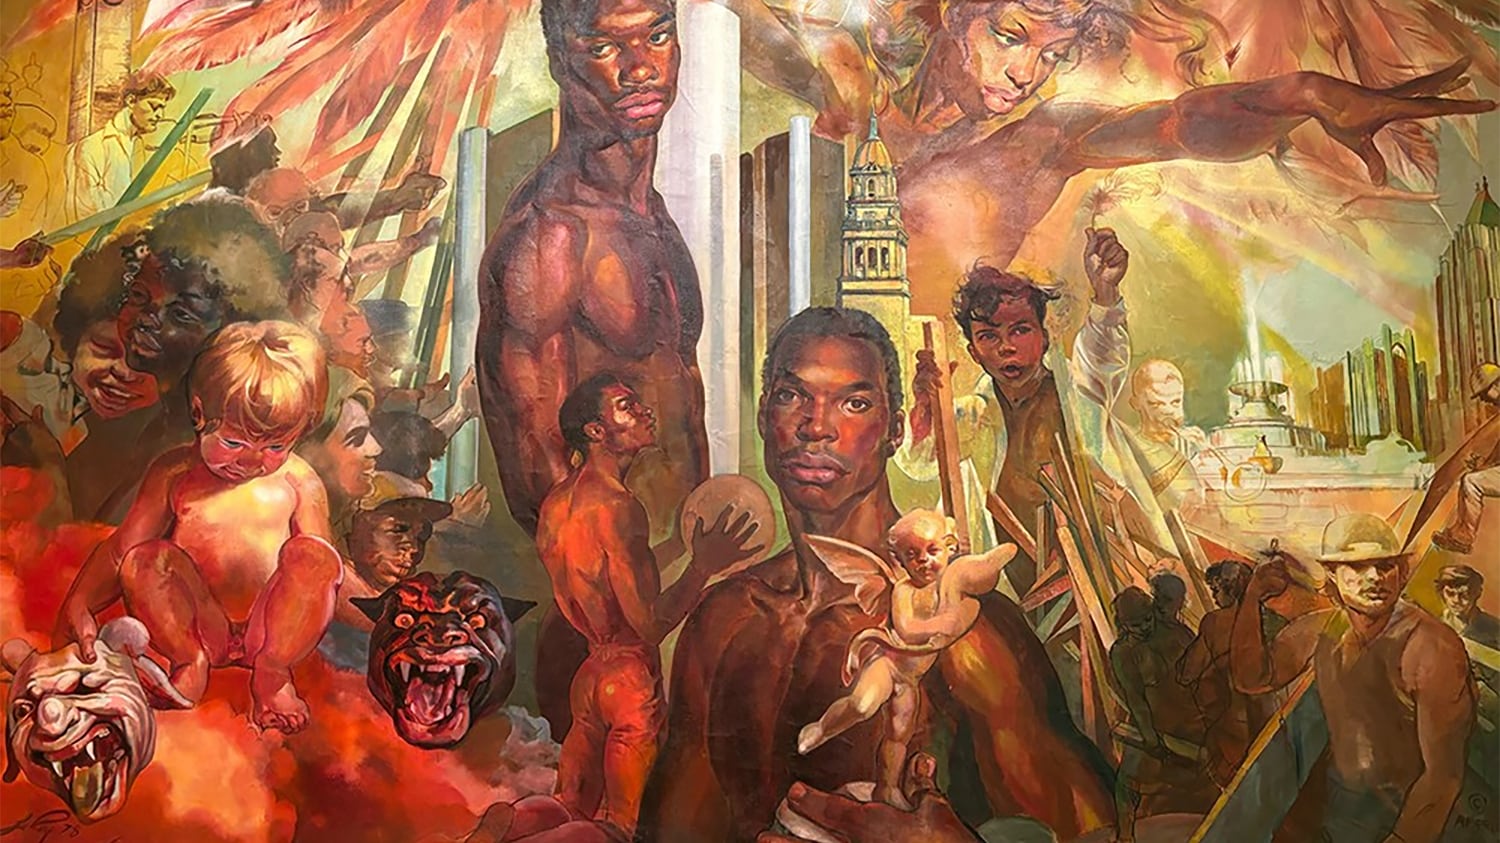 LeRoy Foster's painting showing multiple Black men and other people with Detroit buildings and feathers in the background.